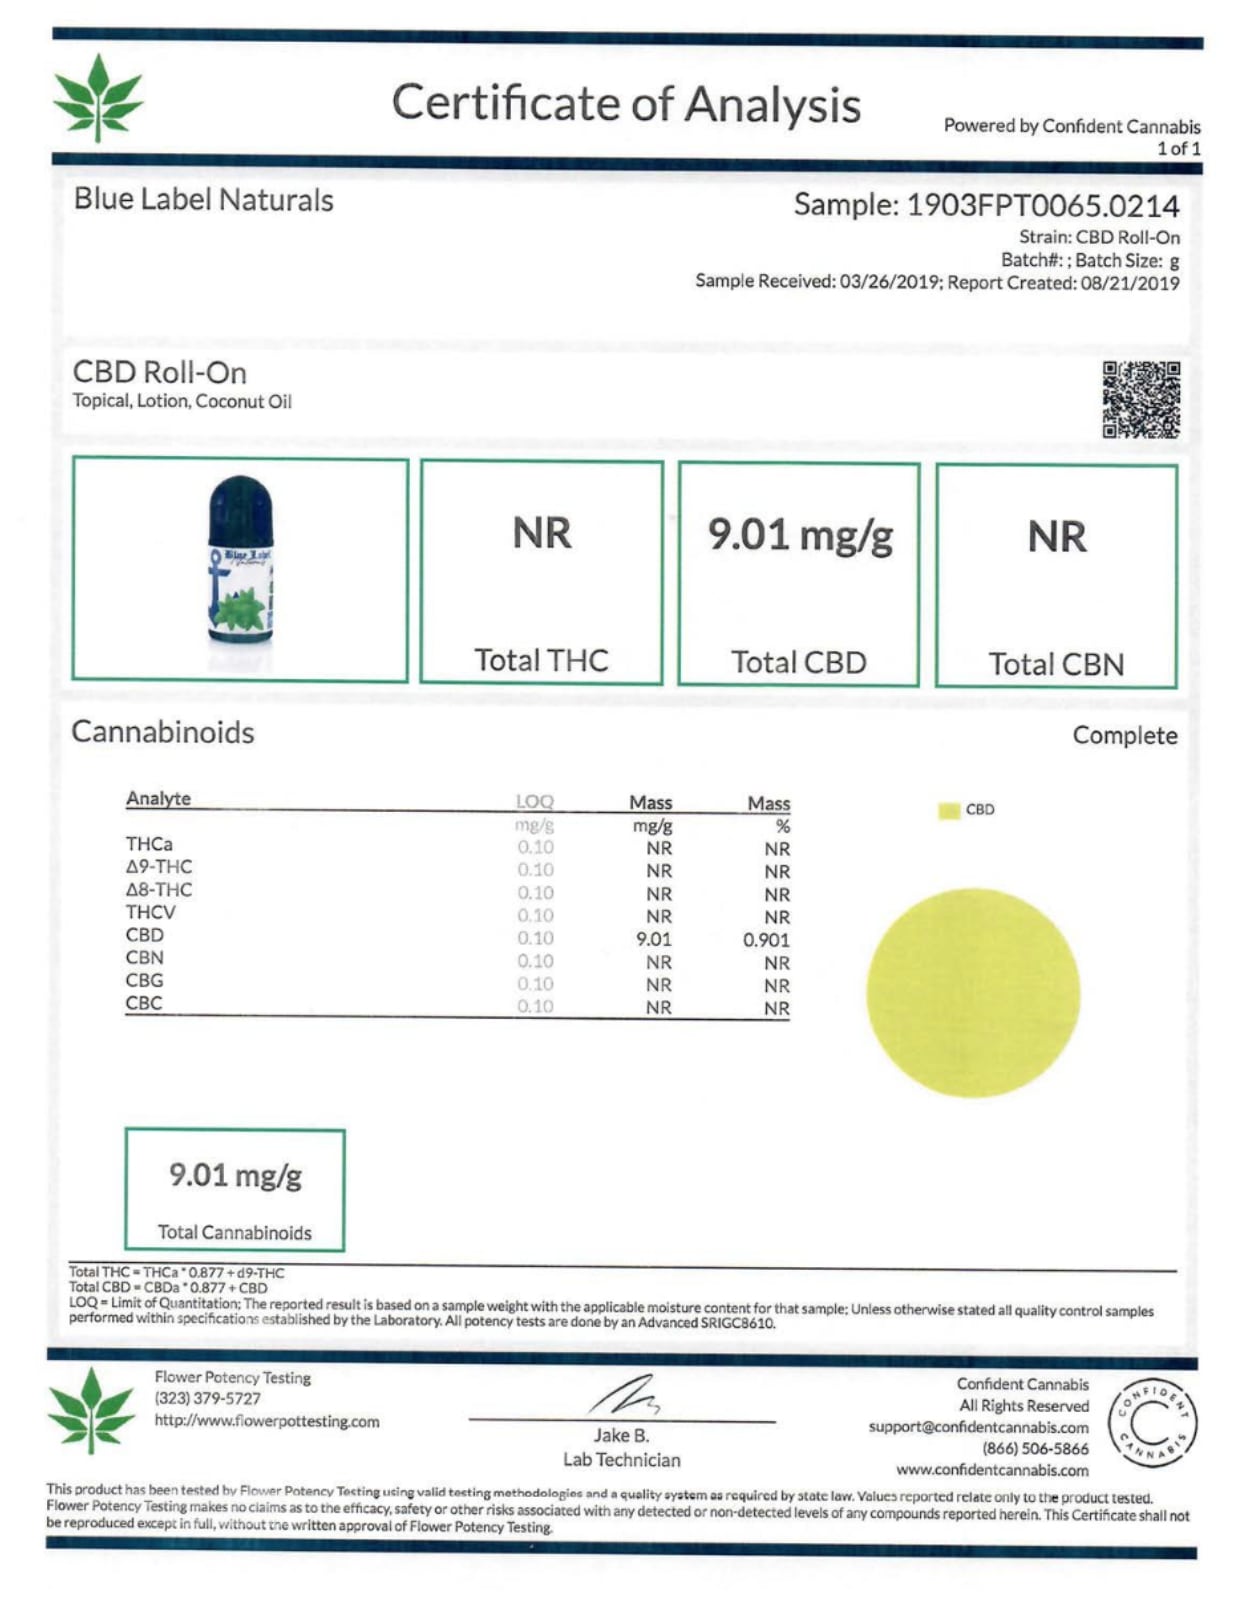 Blue Label CBD Topical Roll On Pain Relieving Gel Lab Report